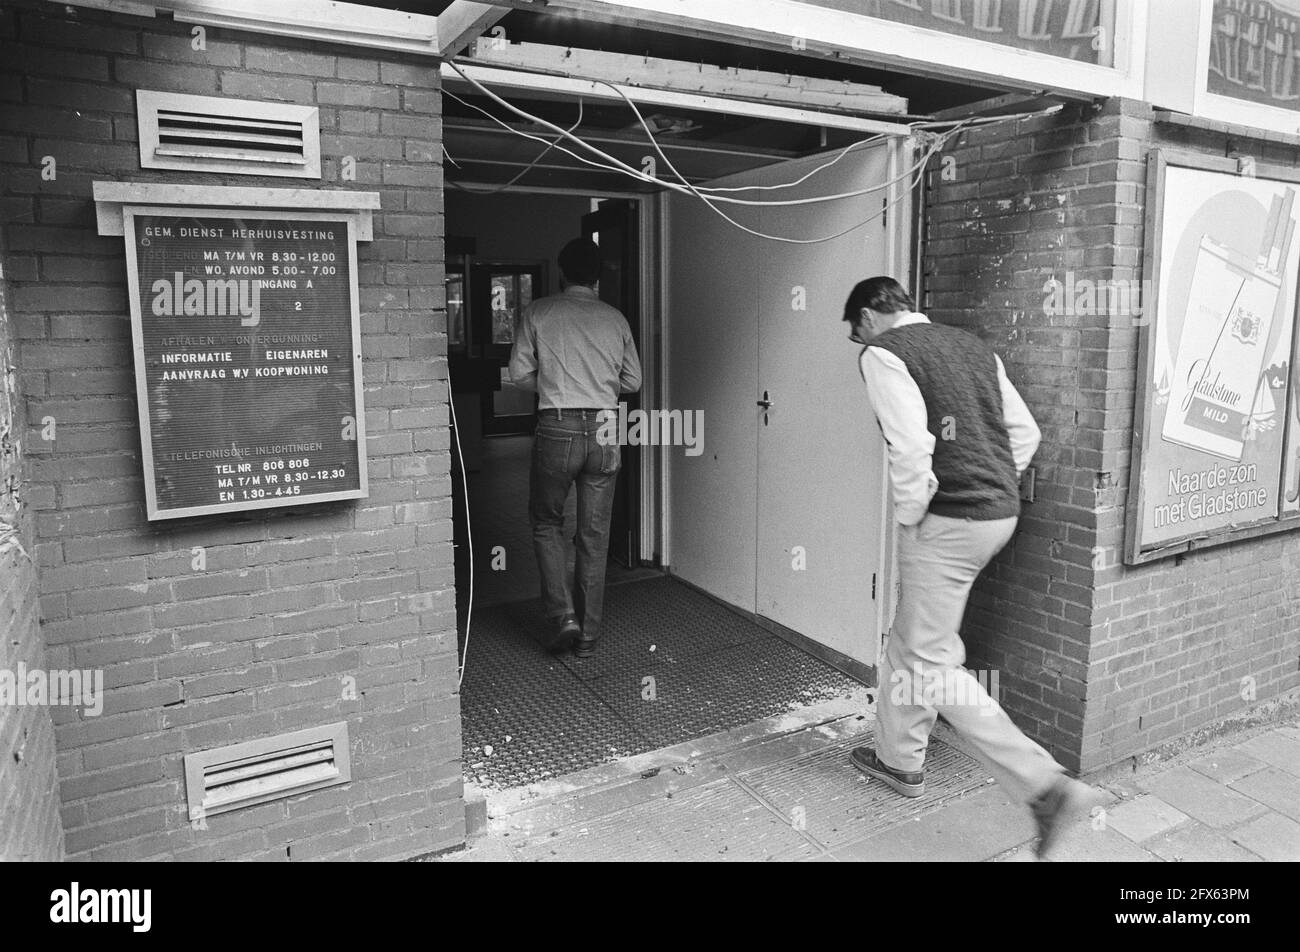 Bombing of Amsterdam Housing Bureau; the venial door, July 5, 1982, Bombings, doors, The Netherlands, 20th century press agency photo, news to remember, documentary, historic photography 1945-1990, visual stories, human history of the Twentieth Century, capturing moments in time Stock Photo